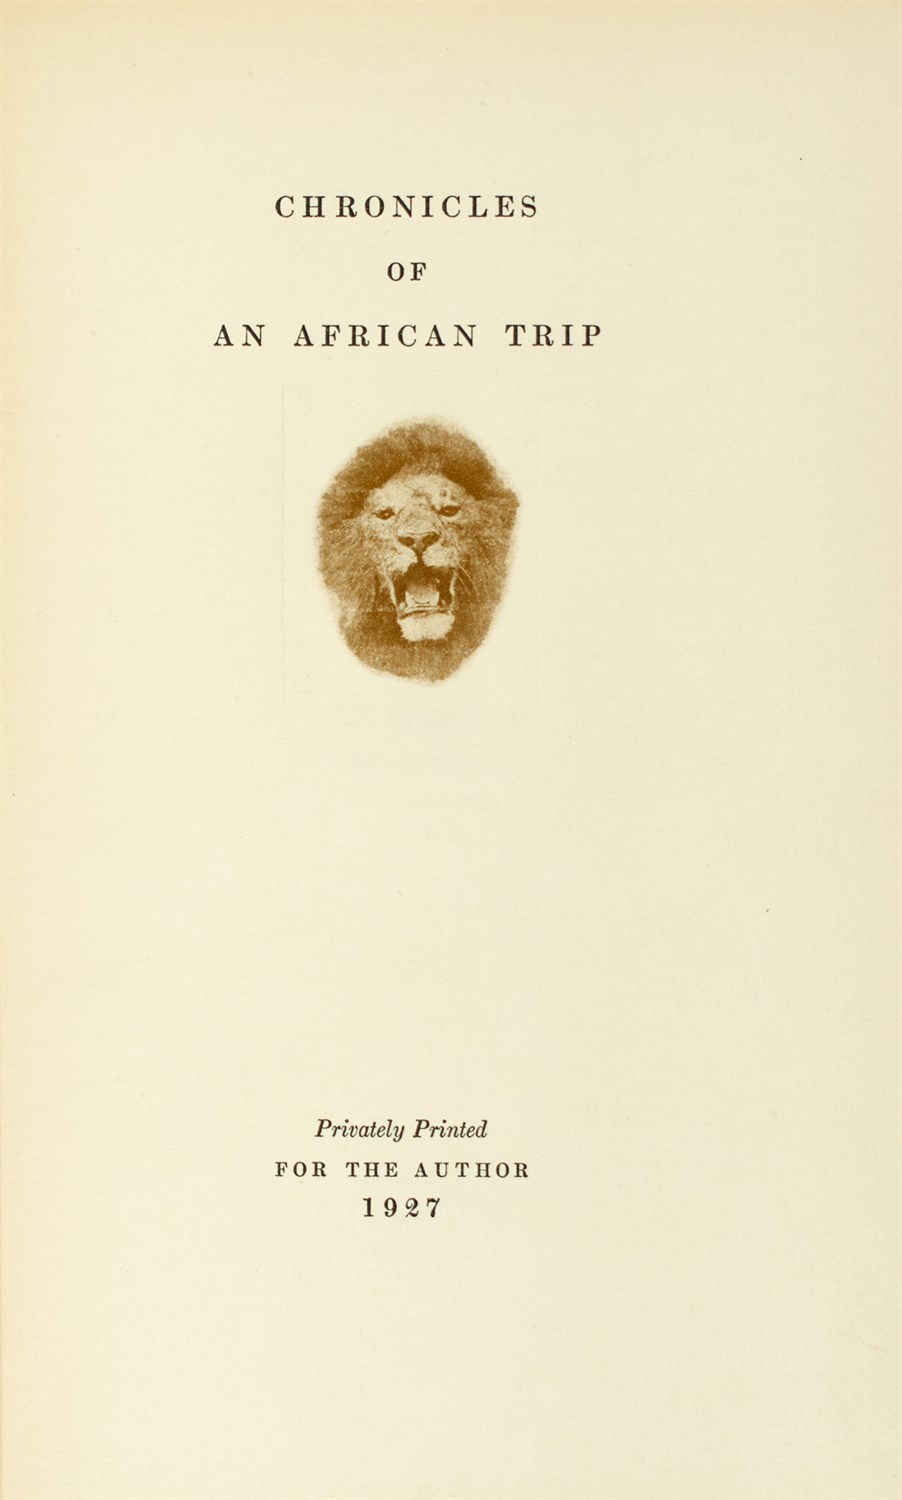 Lot 75 - [HUNTING]
[EASTMAN, GEORGE]. Chronicles of an African Trip.